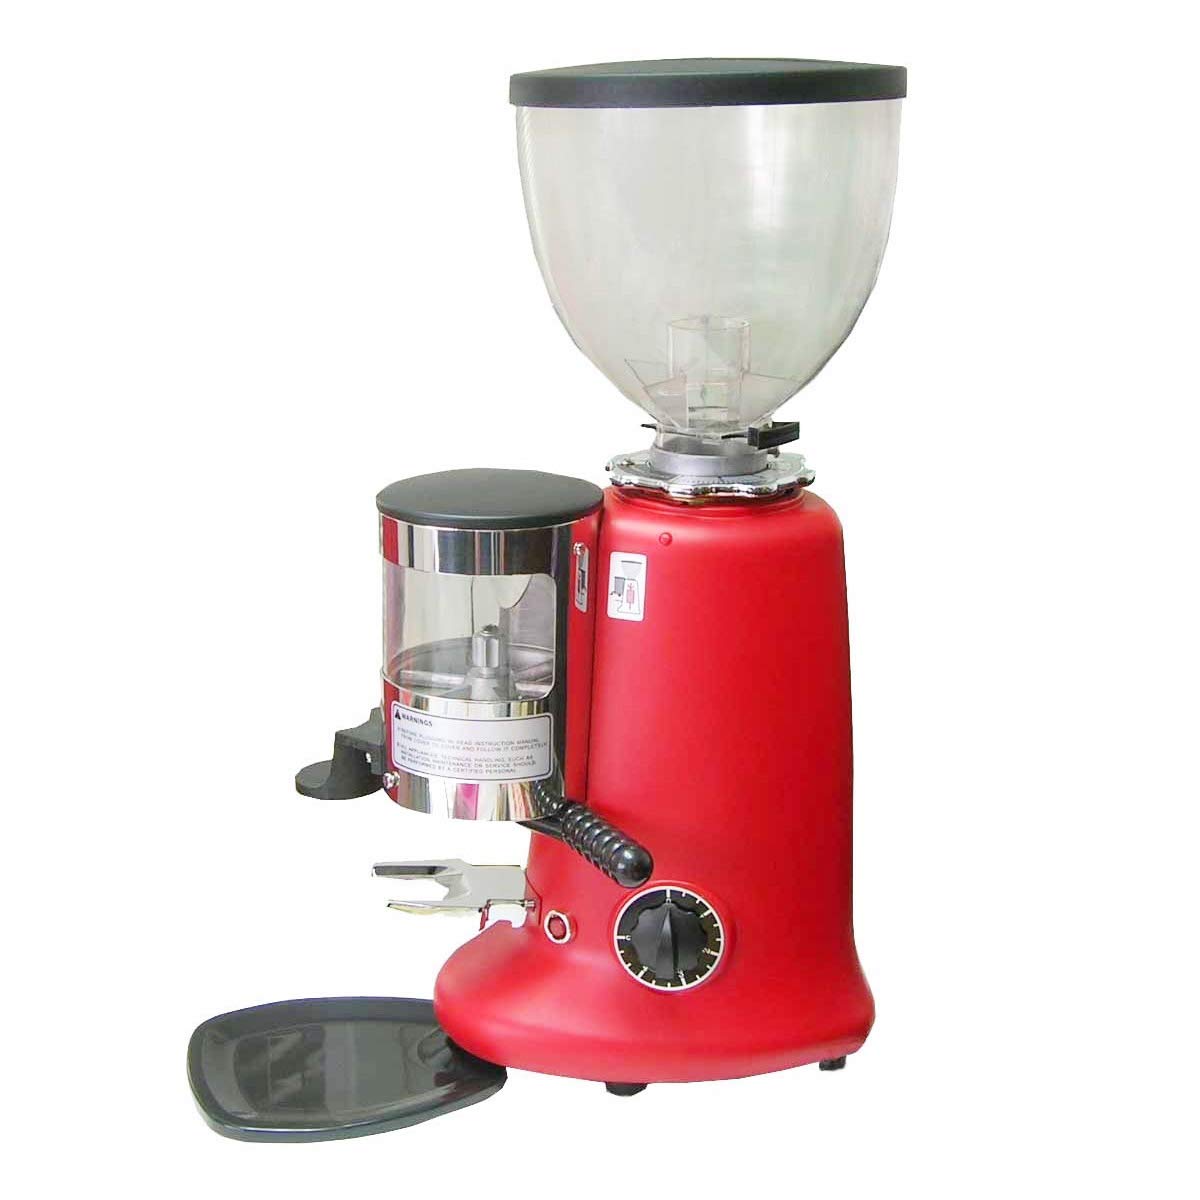 CHEF PROSENTIALS CG-11 coffee grinder Espresso commercial coffee bean grinding machine for cafe (220V)